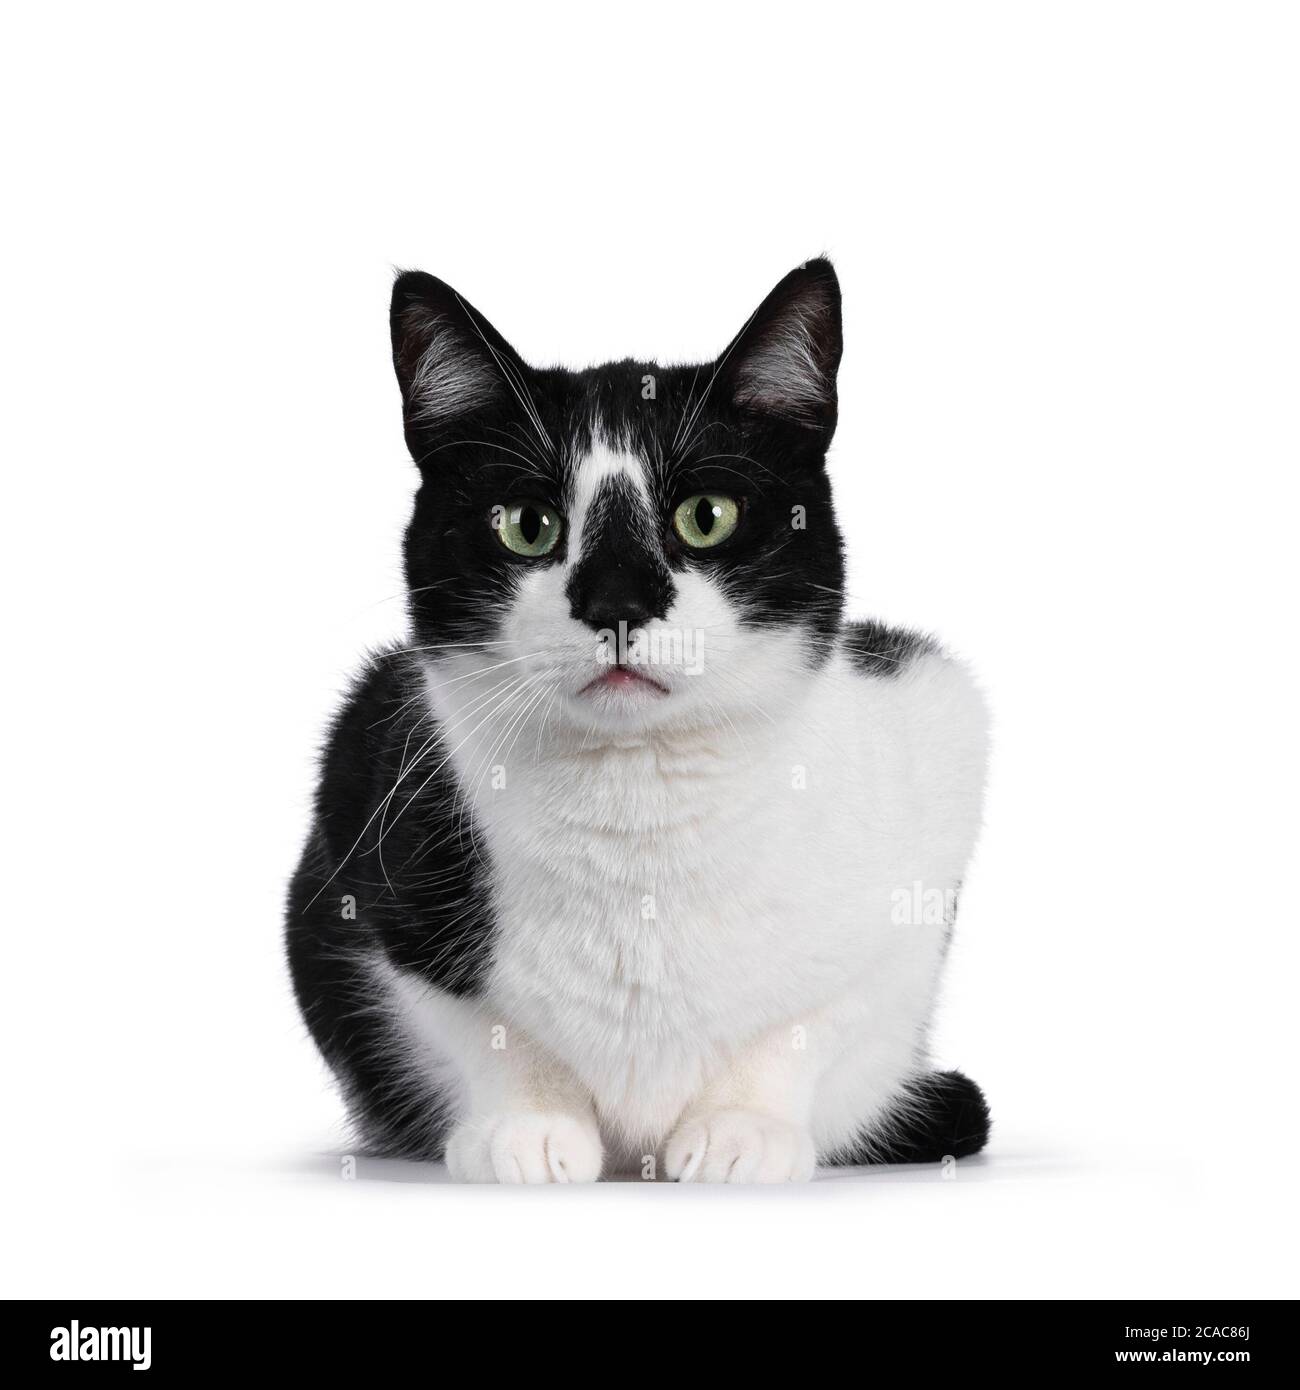 Cute black and white house cat, sitting facing forwards. Looking straight at camera with mesmerizing green eyes. Isolated on white background. Stock Photo